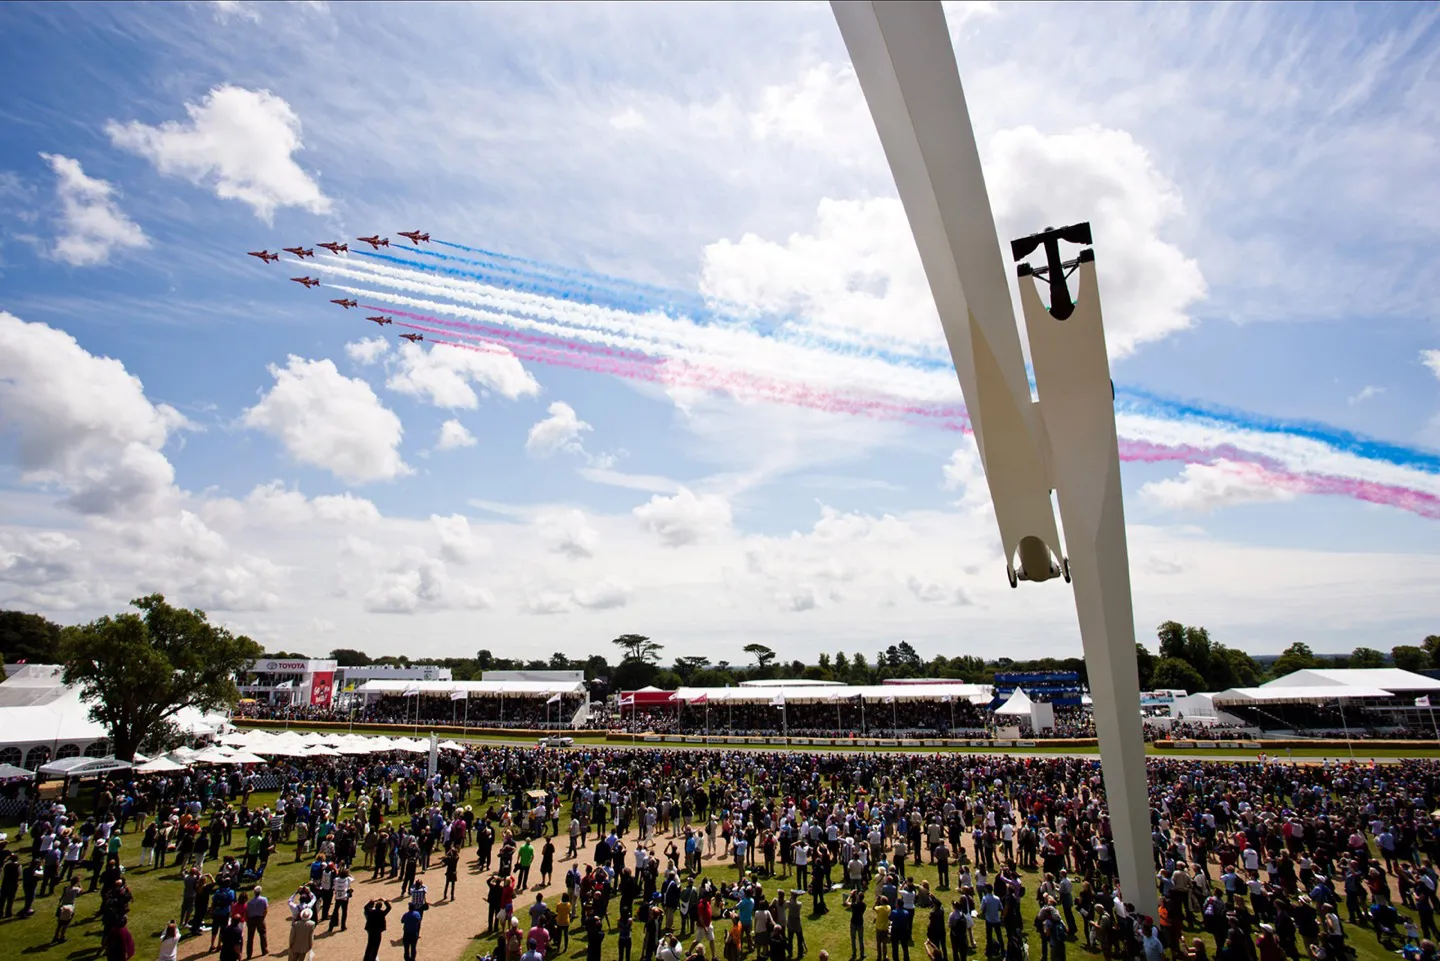 Watch the airshow and avoid the crowds in luxurious hospitality on Goodwood weekend